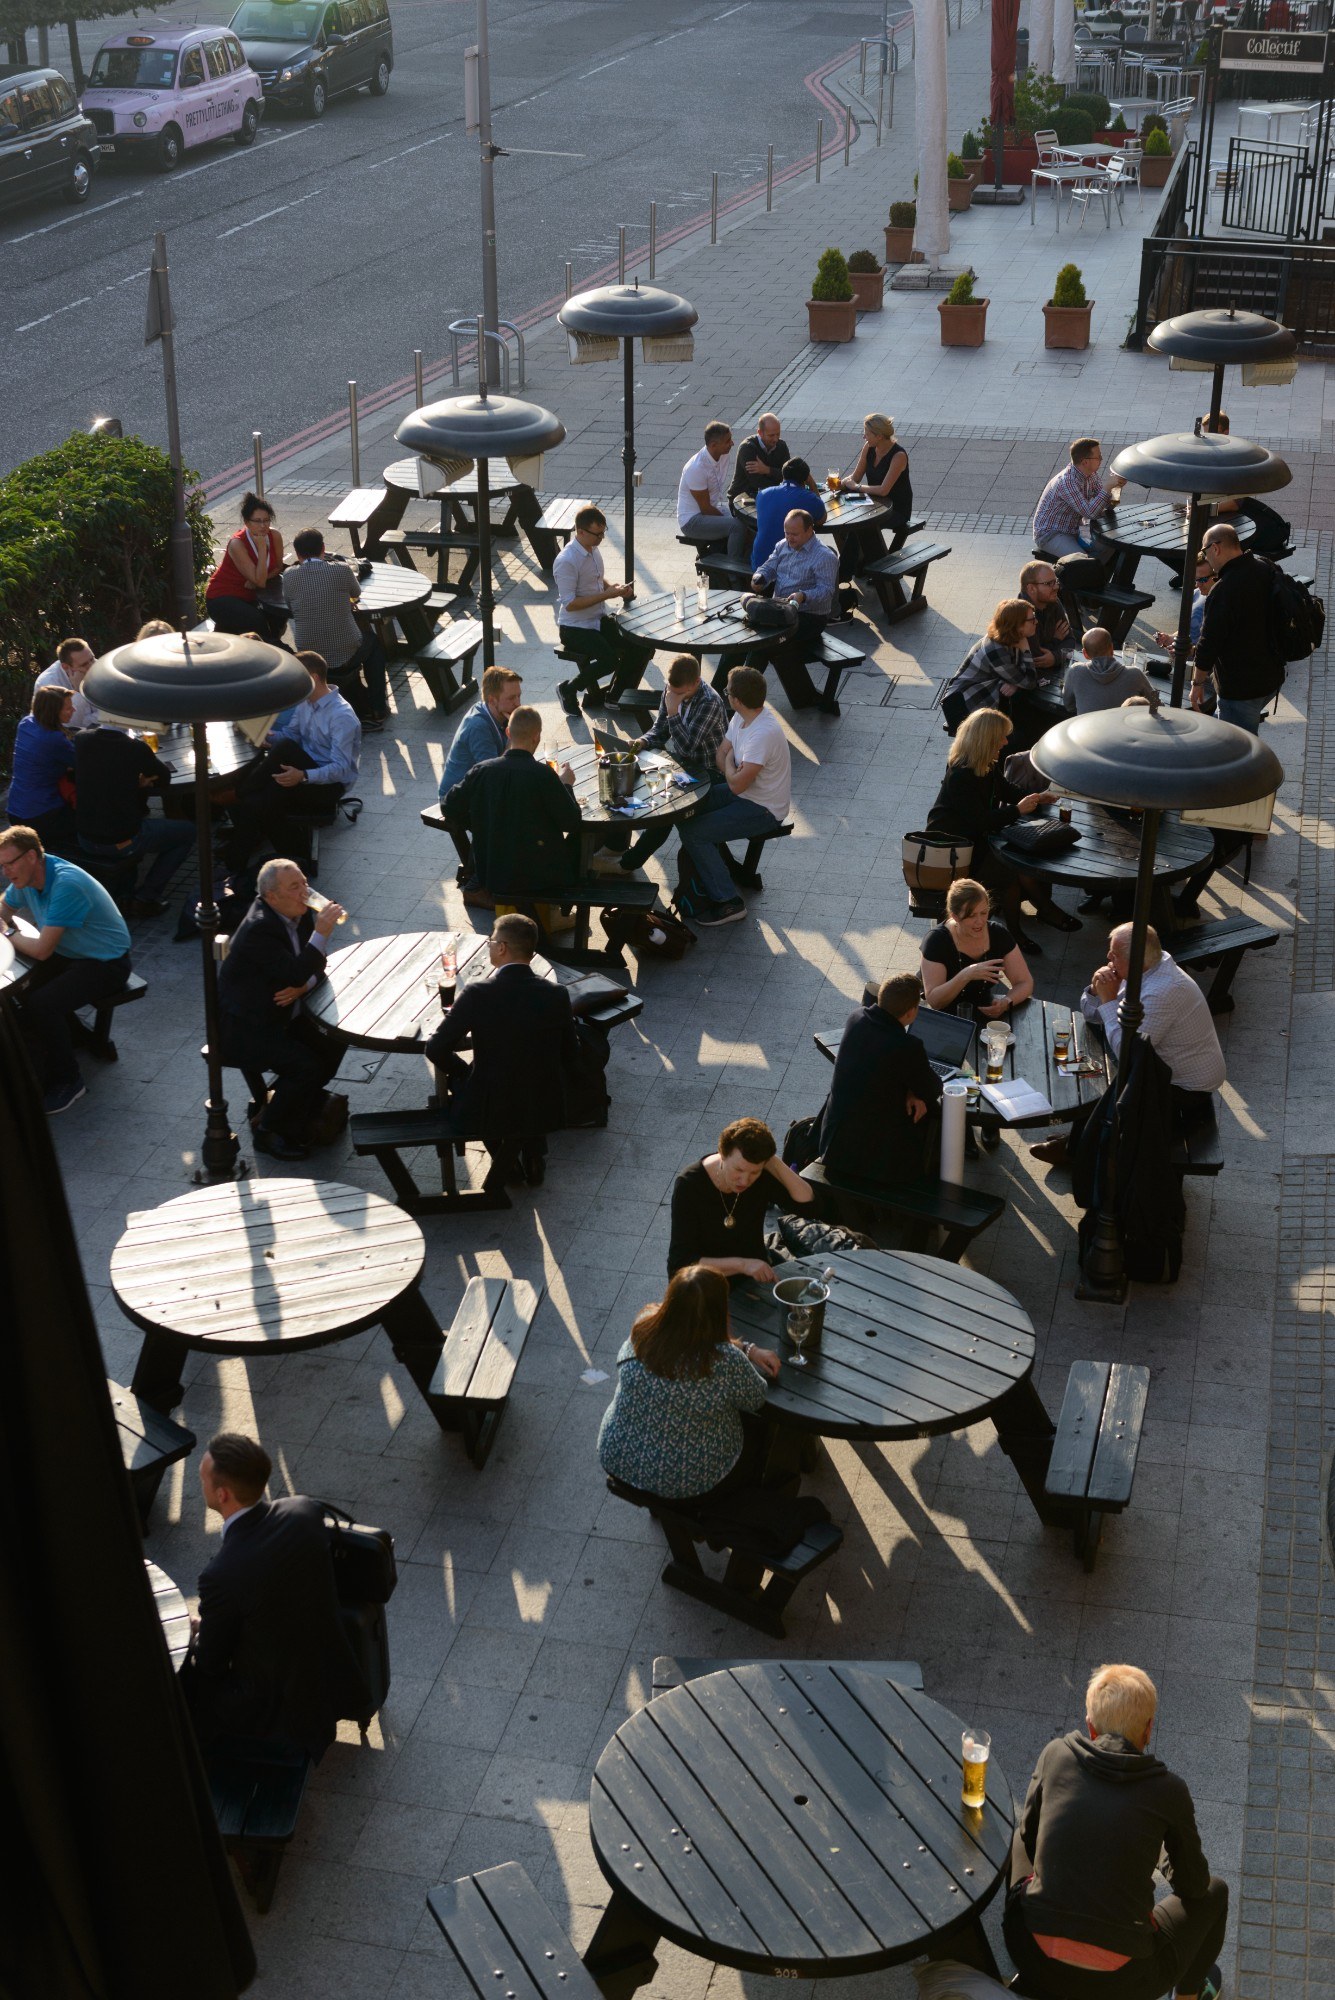 People sat at tables outdoors near ExCeL